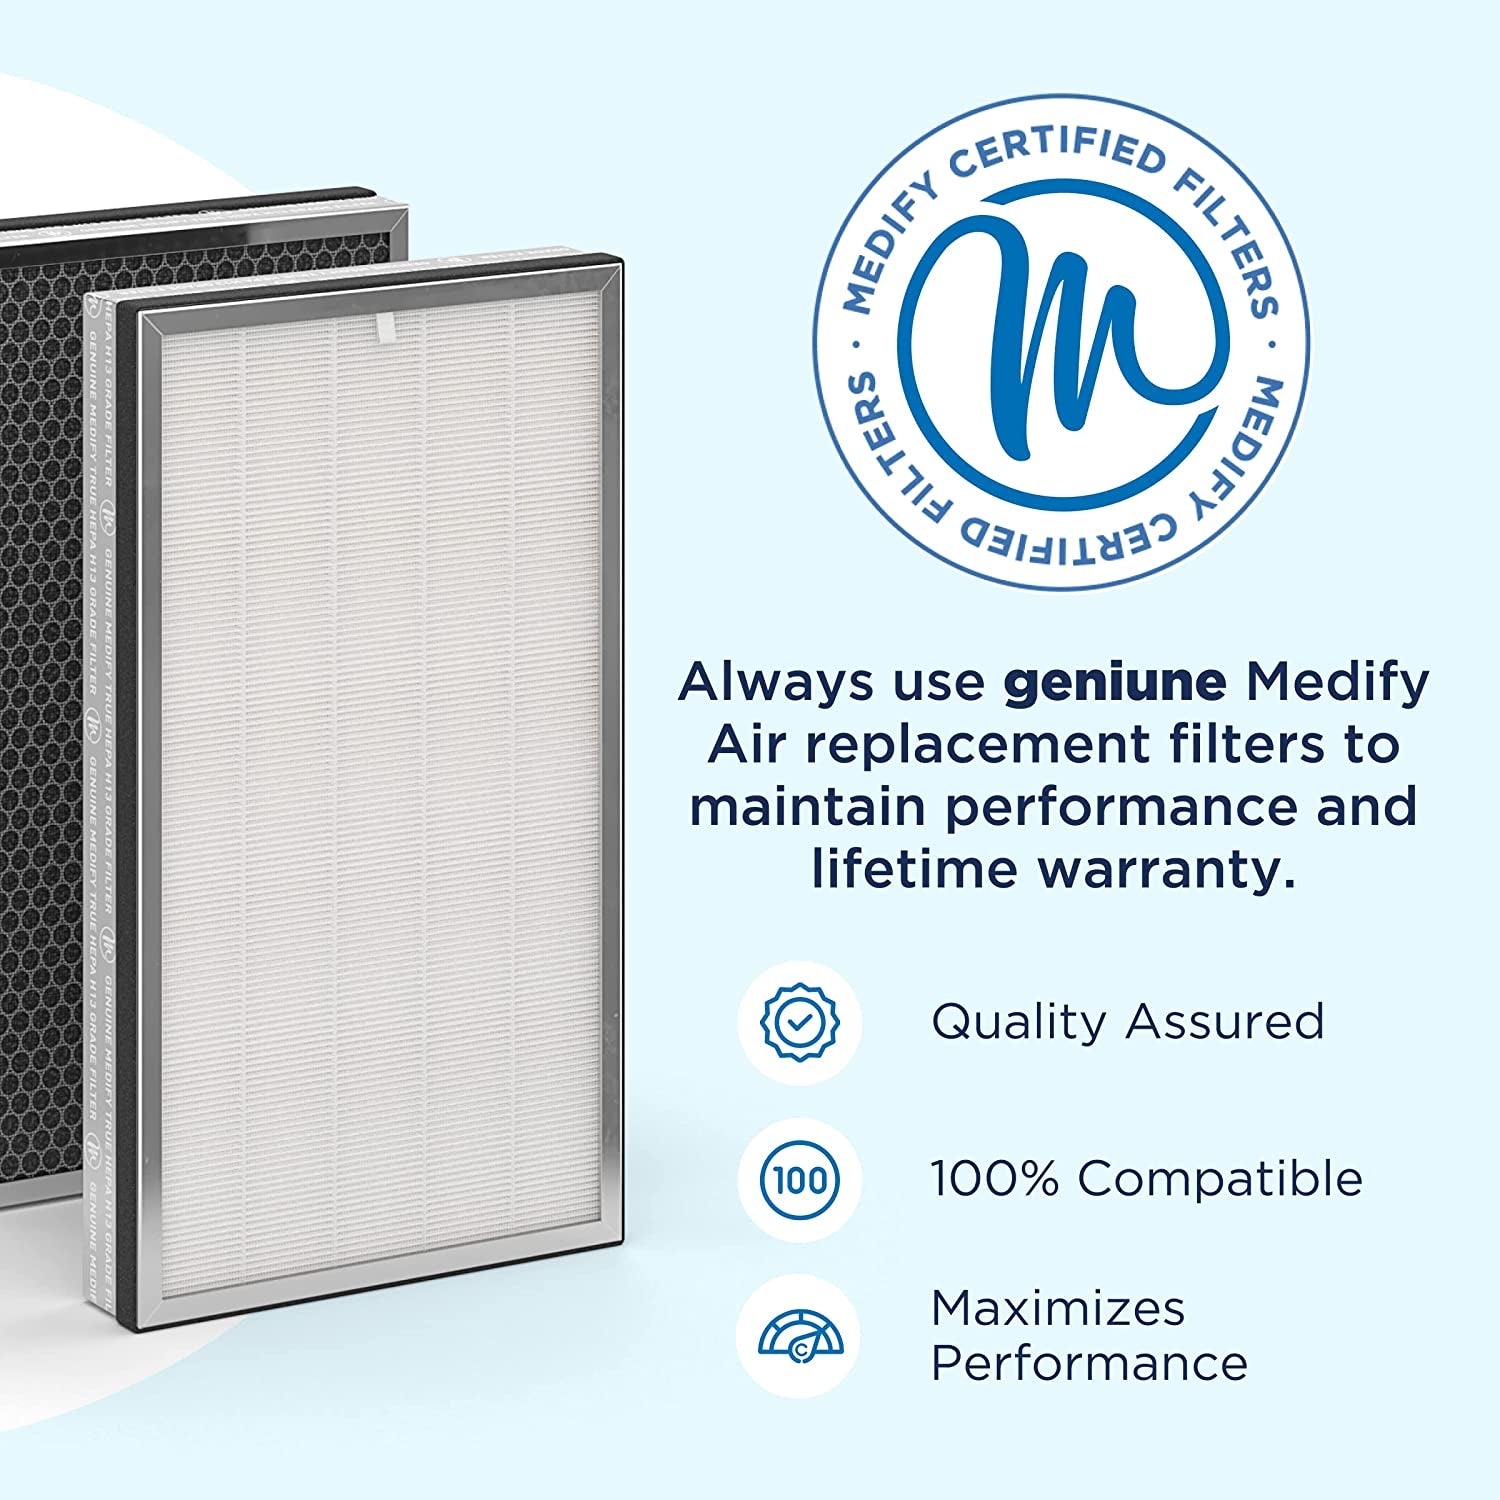 Medify Air, Medify MA-112 Genuine Replacement Filter | for Allergens, Wildfire Smoke, Dust, Odors, Pollen, Pet Dander | 3 in 1 with Pre-Filter, H13 HEPA, and Activated Carbon for 99.9% Removal | 1-Pack